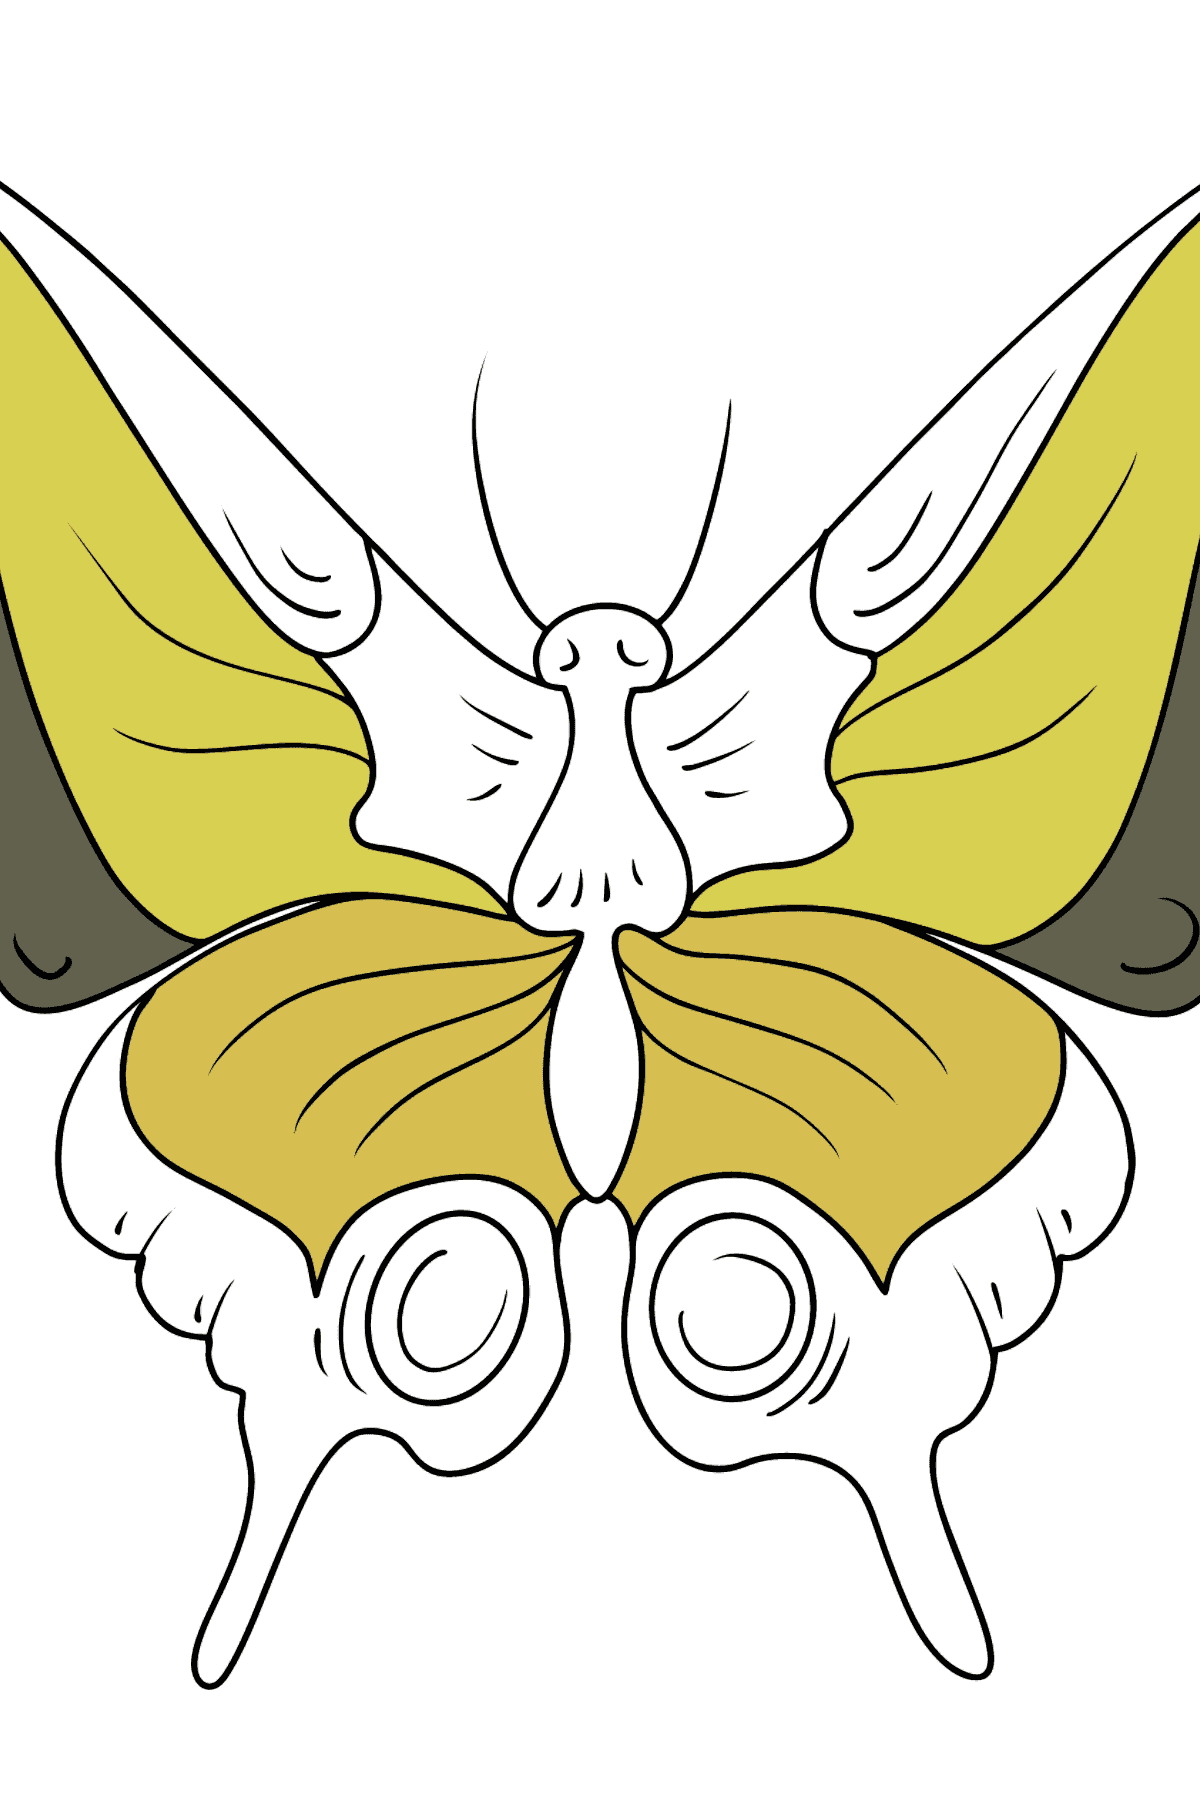 Swallowtail Butterfly coloring page - Coloring Pages for Kids